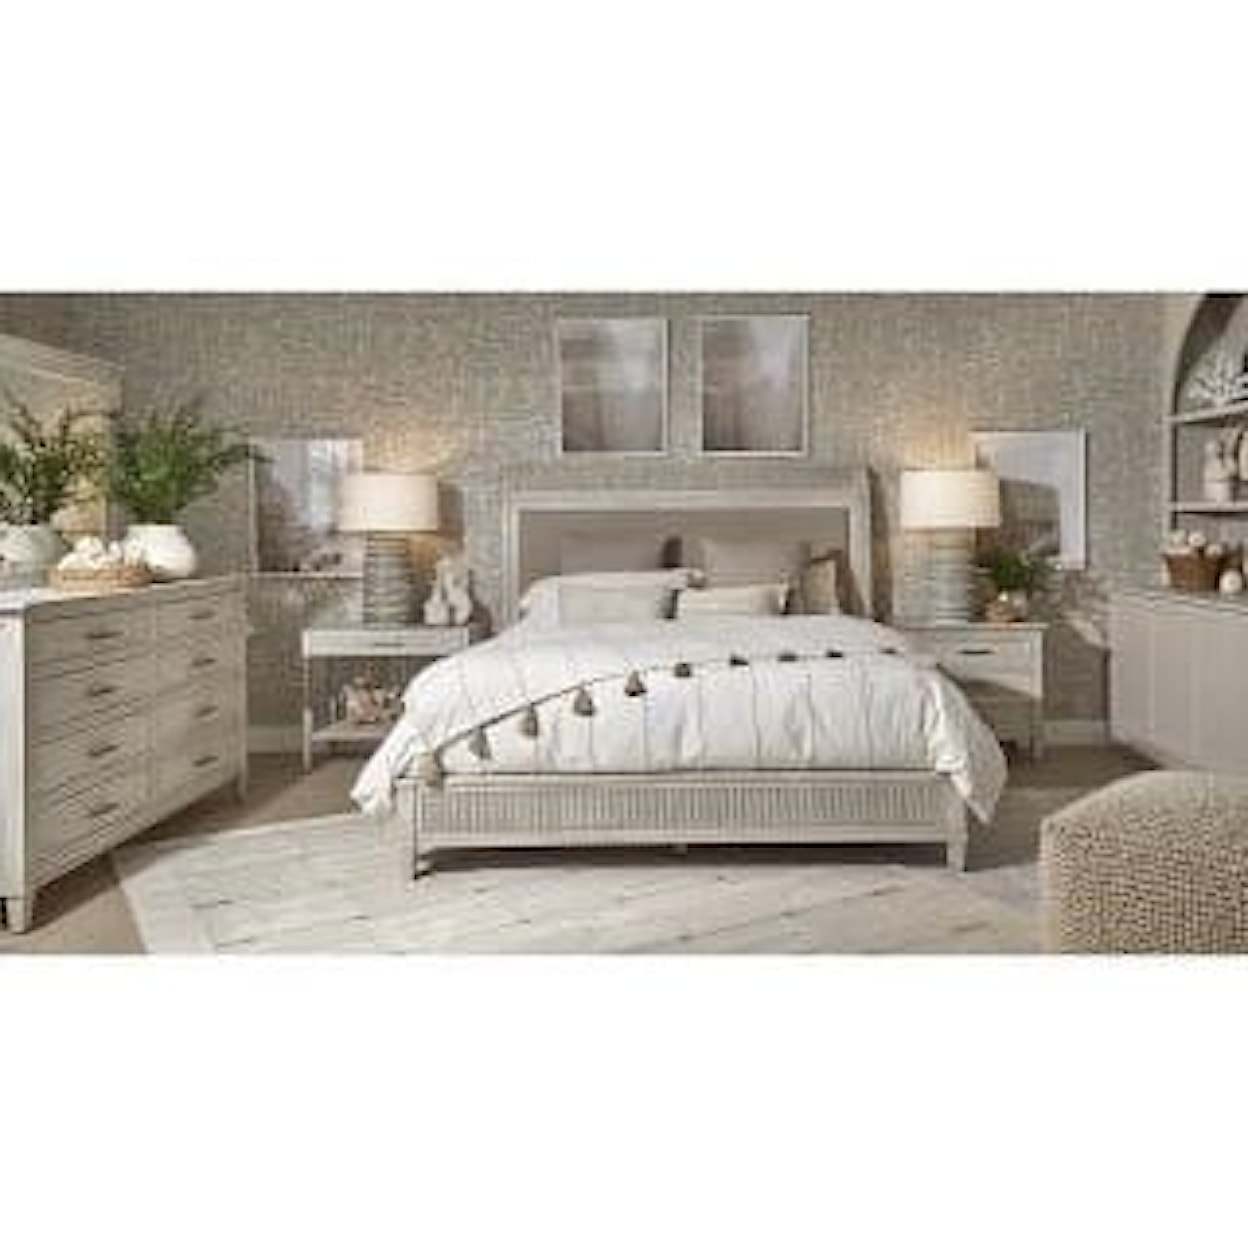 Esprit Decor Home Collection Pacific Collection Upholstered Sleigh Bed